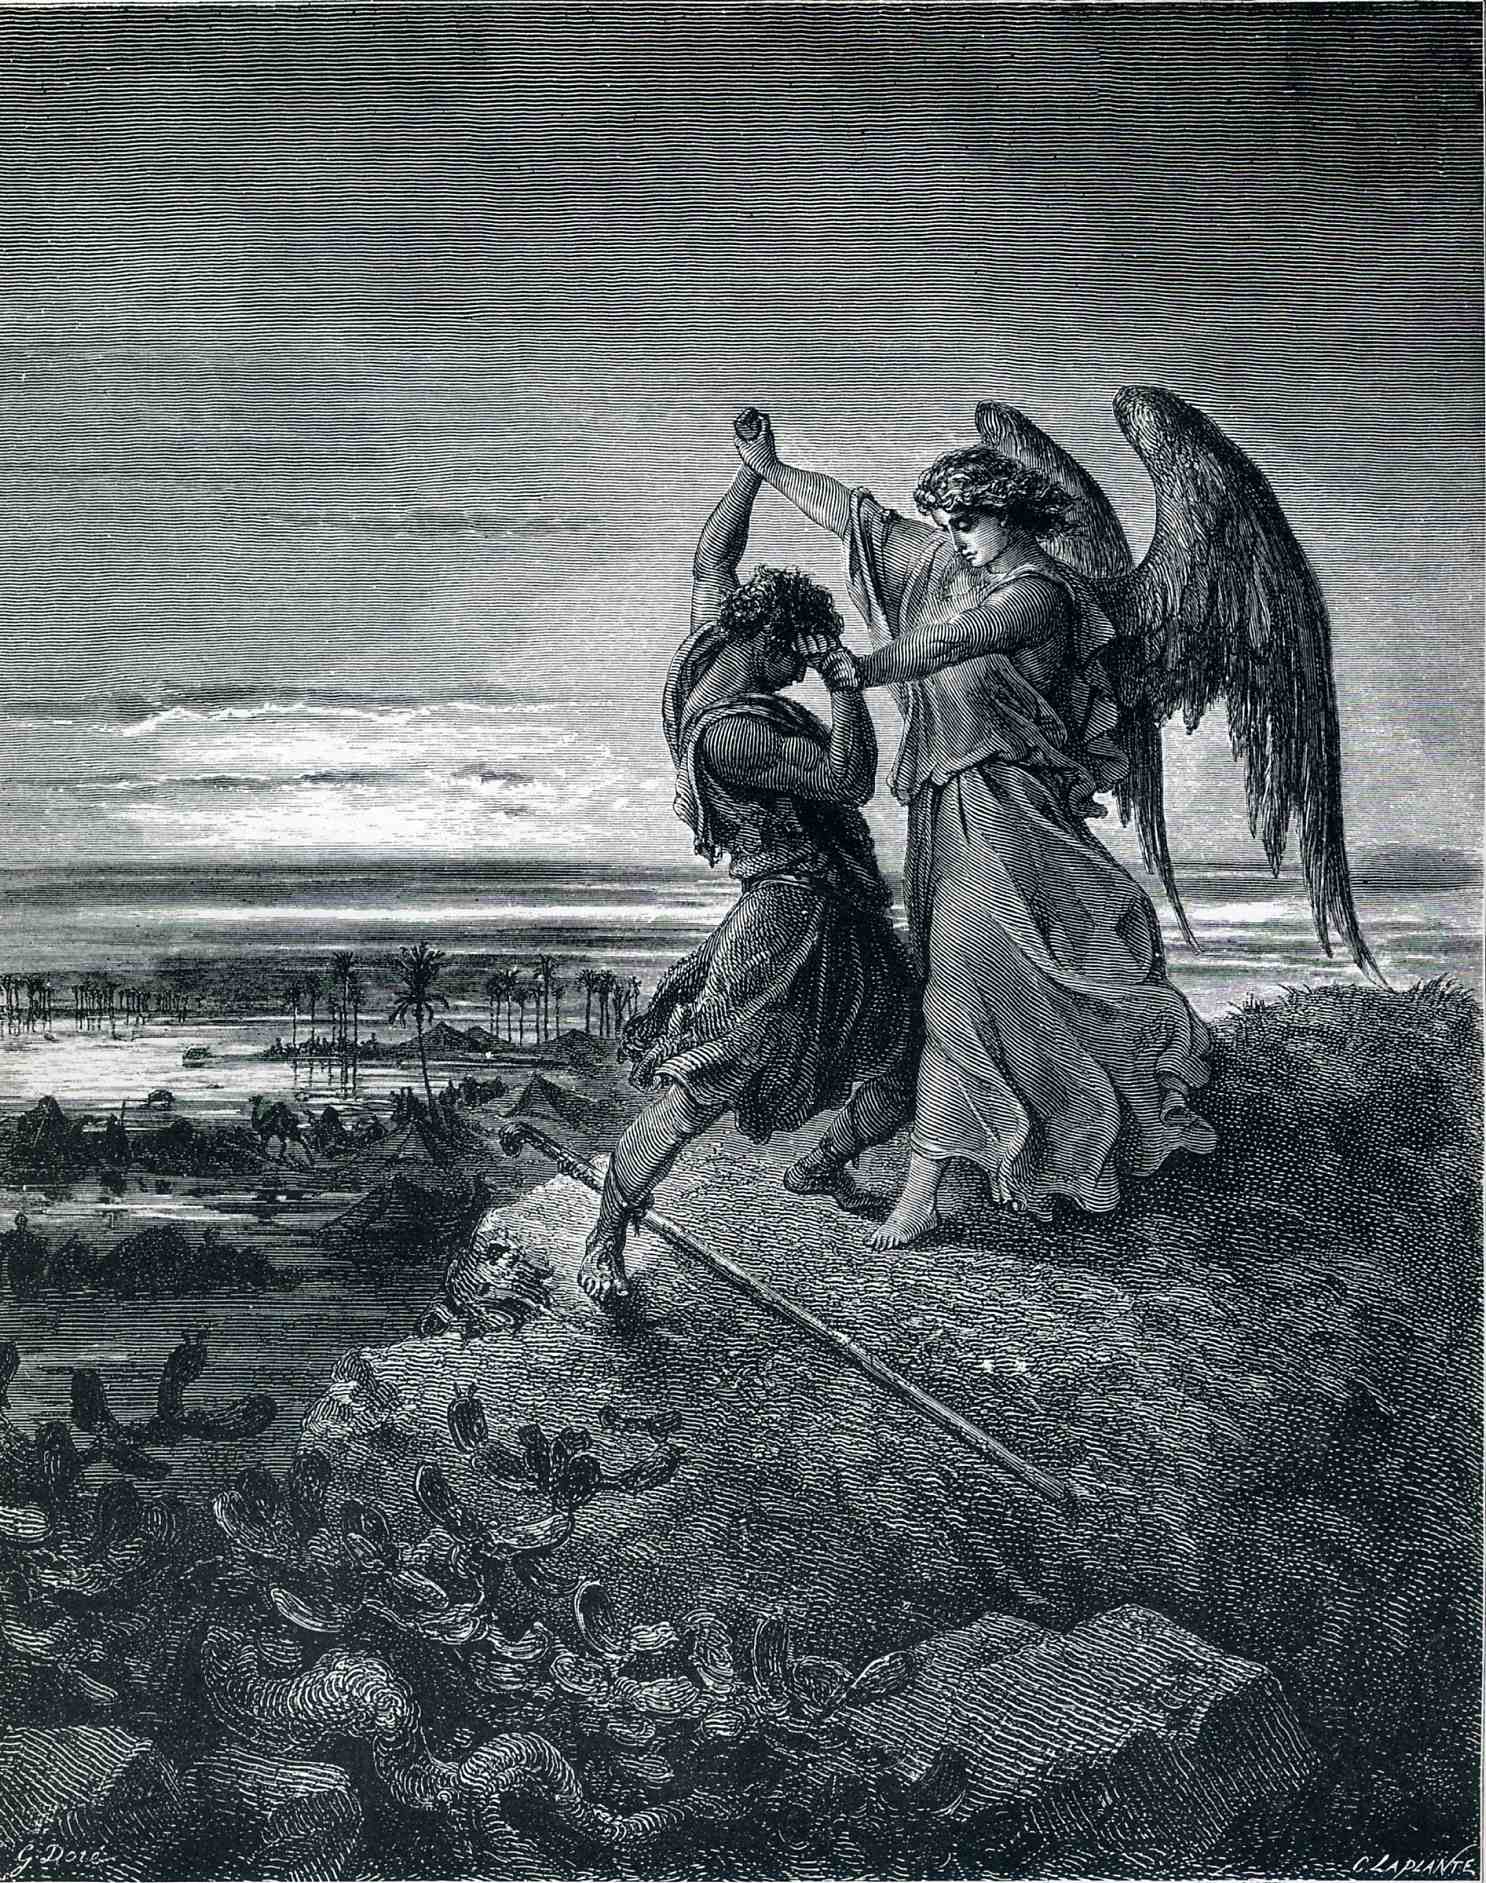 A man wrestles with an angel who holds power over him, leading him towards the edge of a cliff.